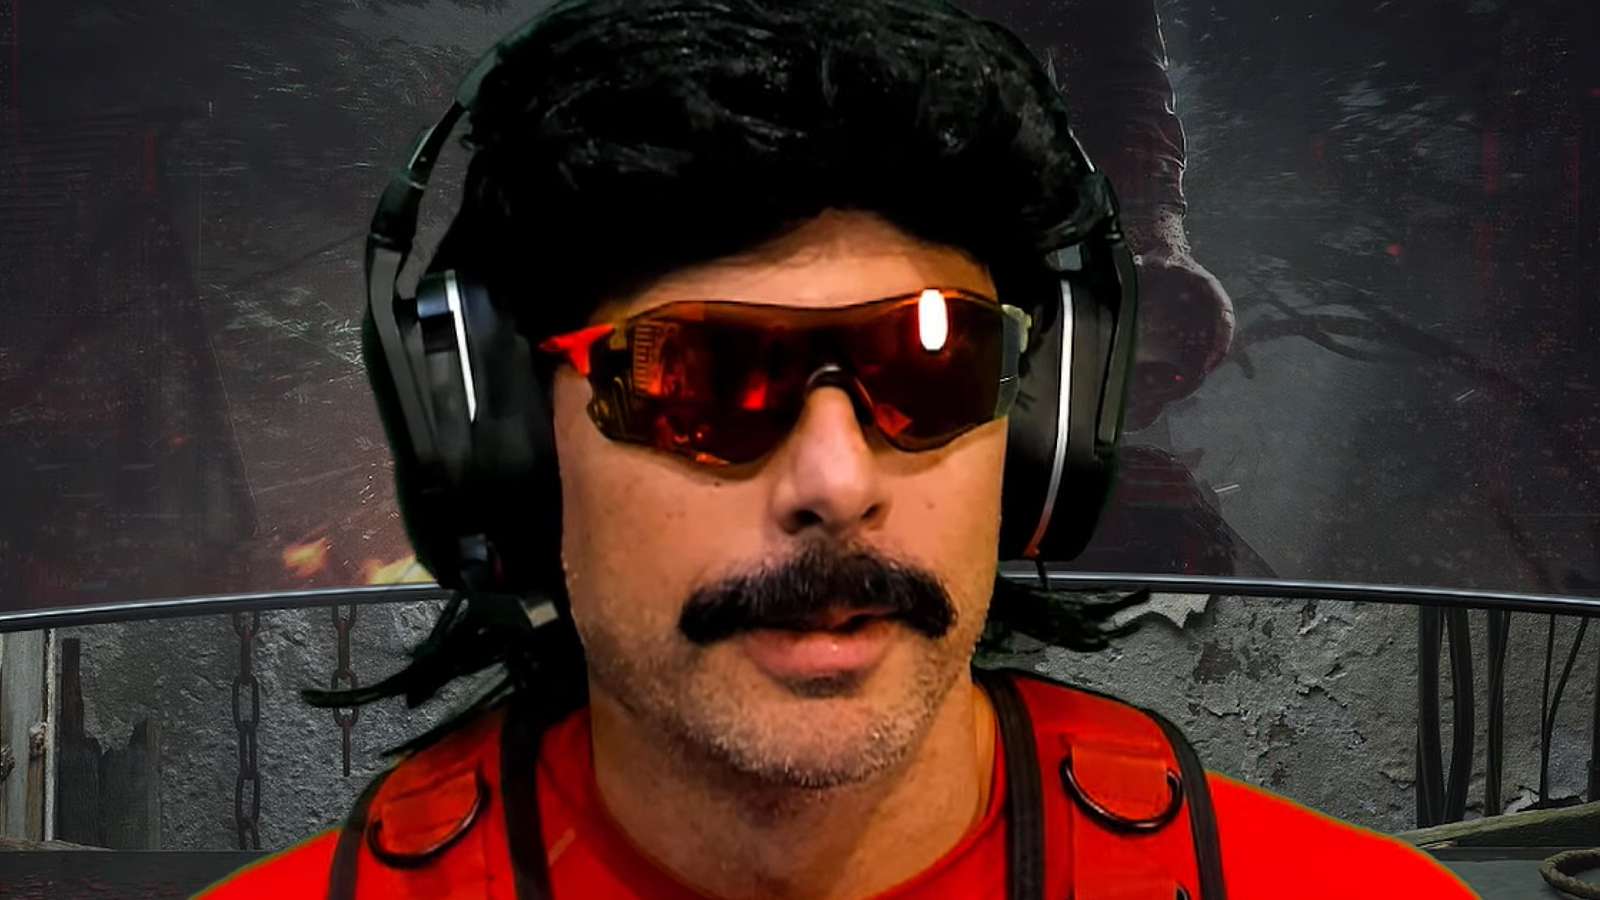 Dr Disrespect talking about Deadrop on stream.